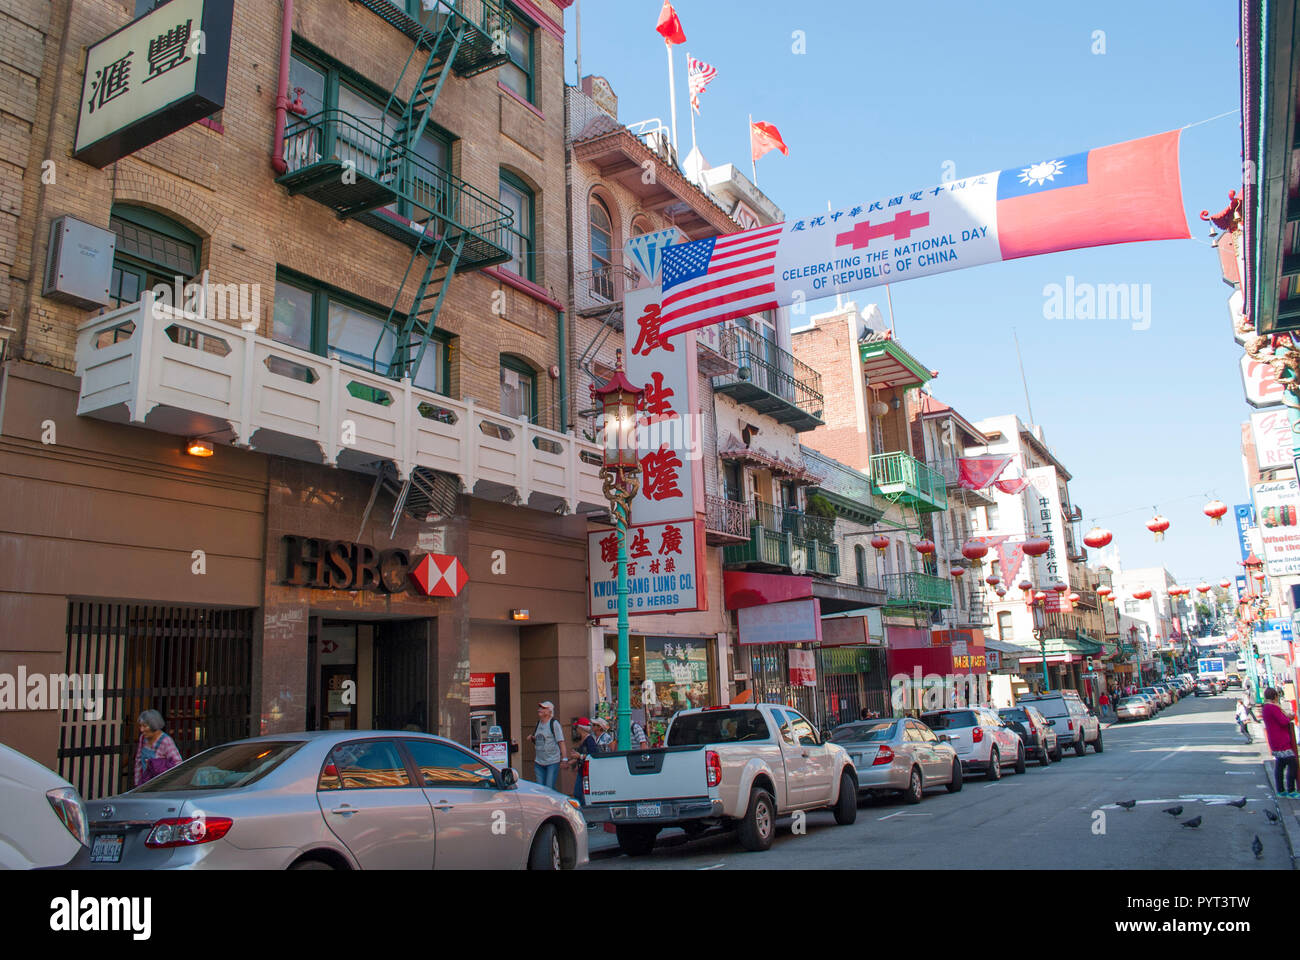 San Francisco, Old Shanghai streets. Aged architecture Stock Photo